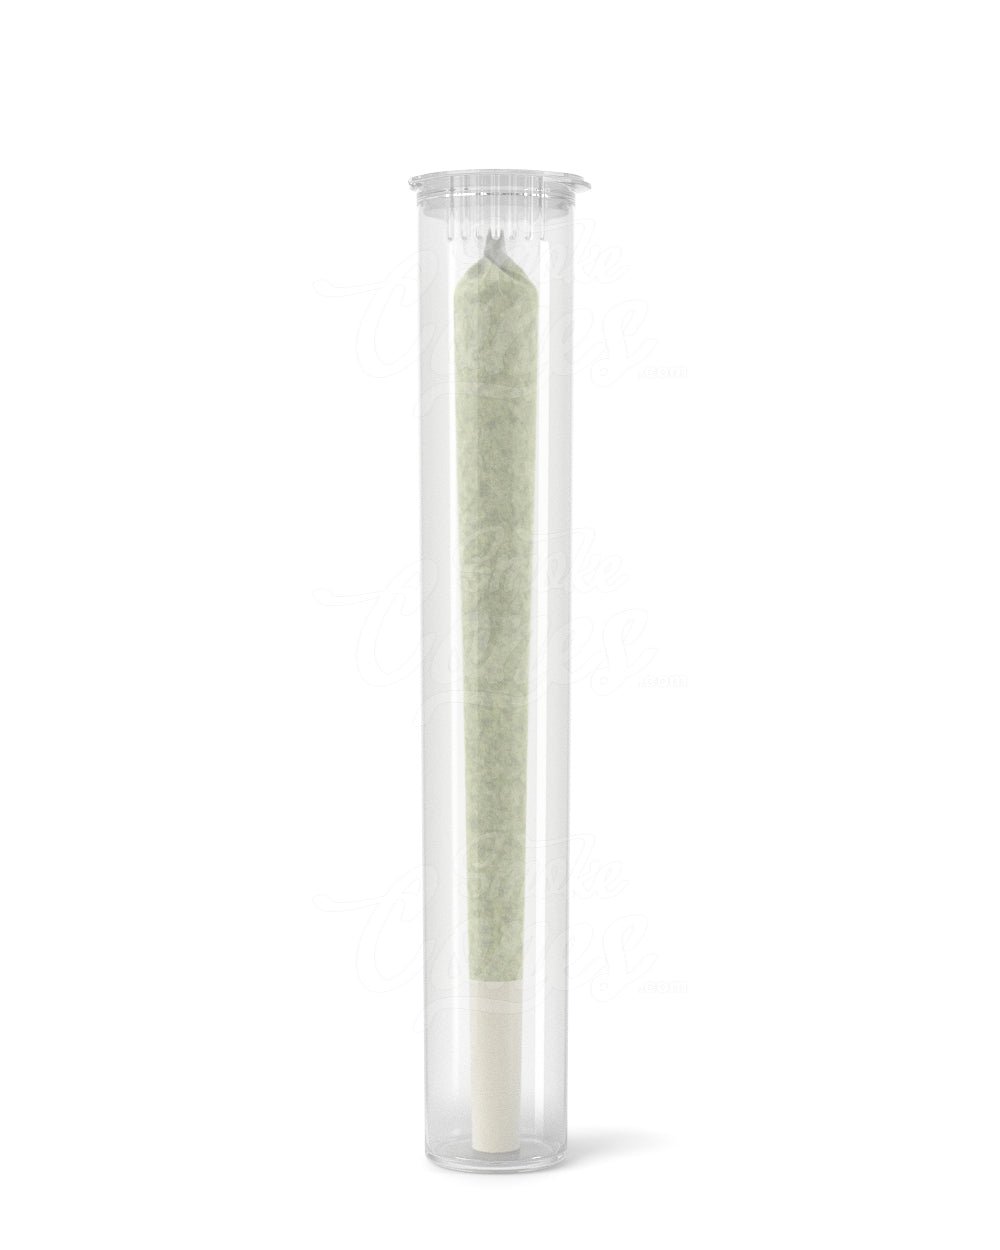 Glass Blunt Tubes - Child Proof - White Cap - 144ct